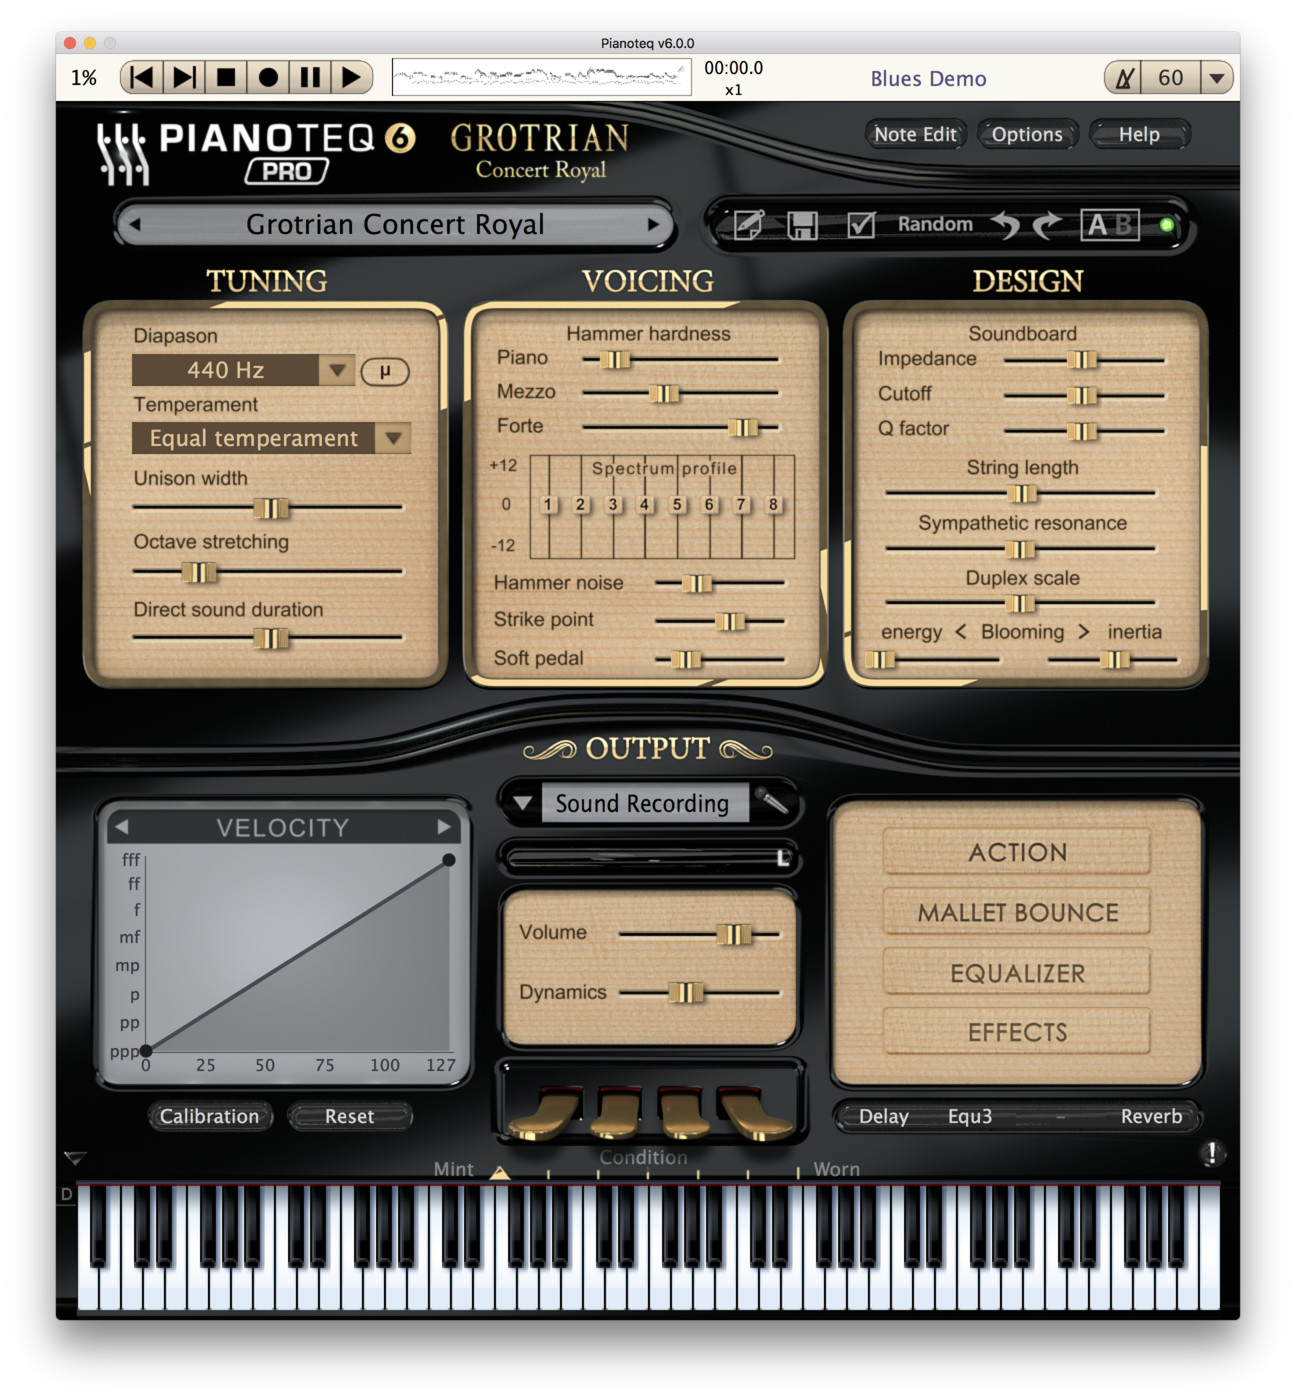 Grotrian Concert Royal Grand Piano add-on for Pianoteq　